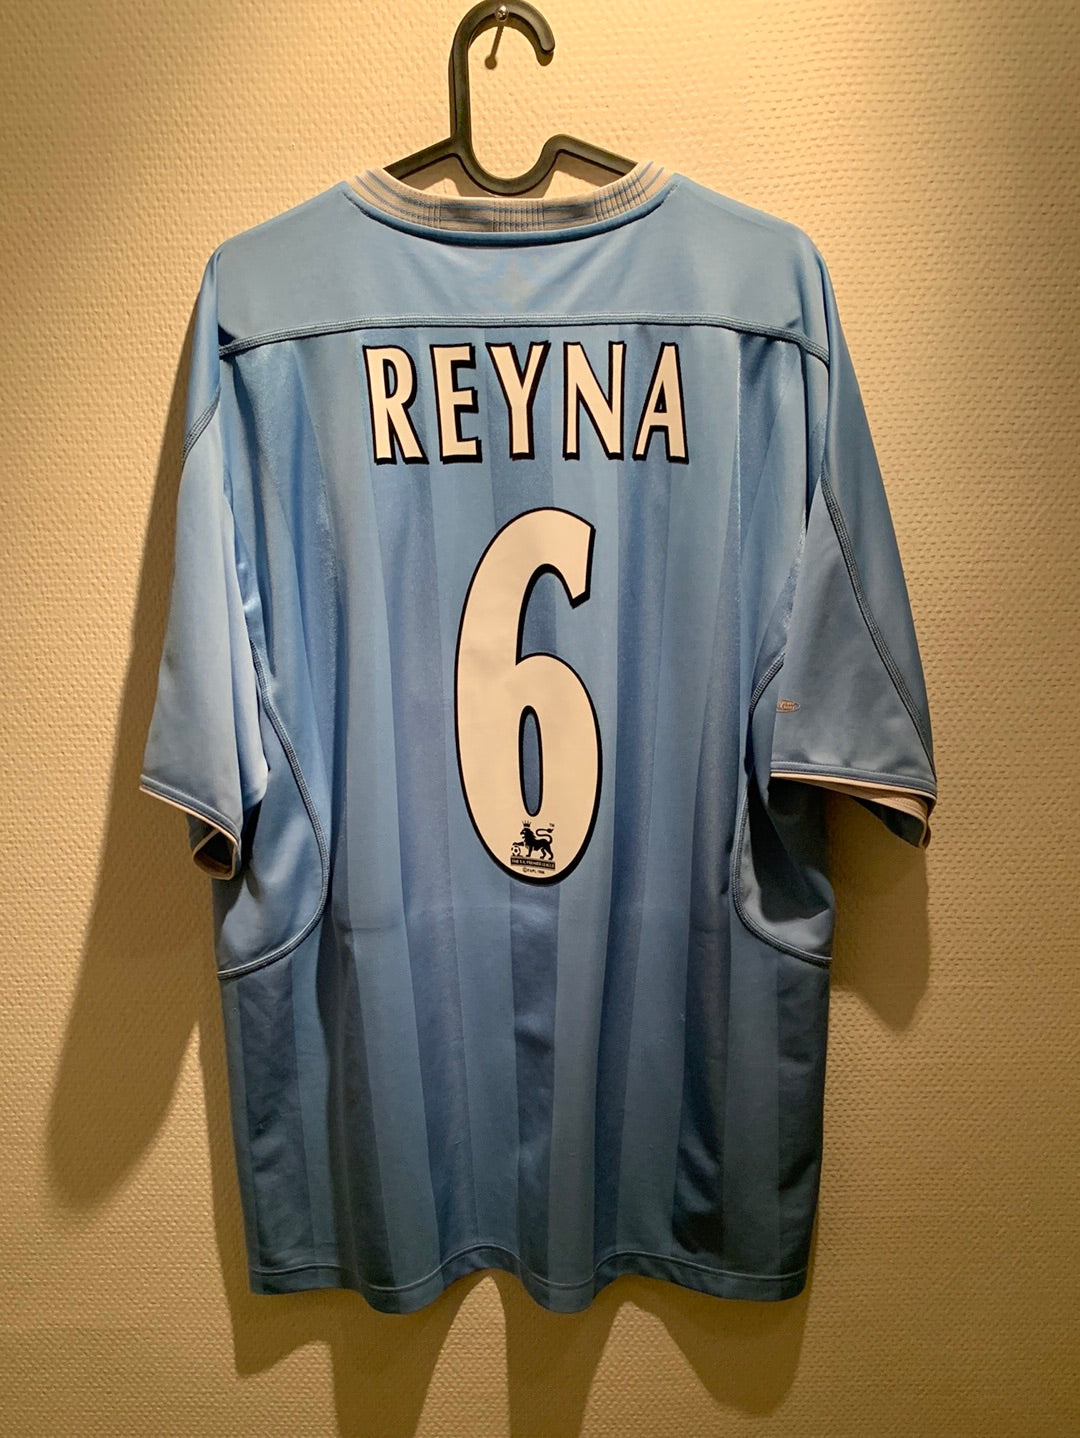 Manchester City Home 03/04 Reyna 6